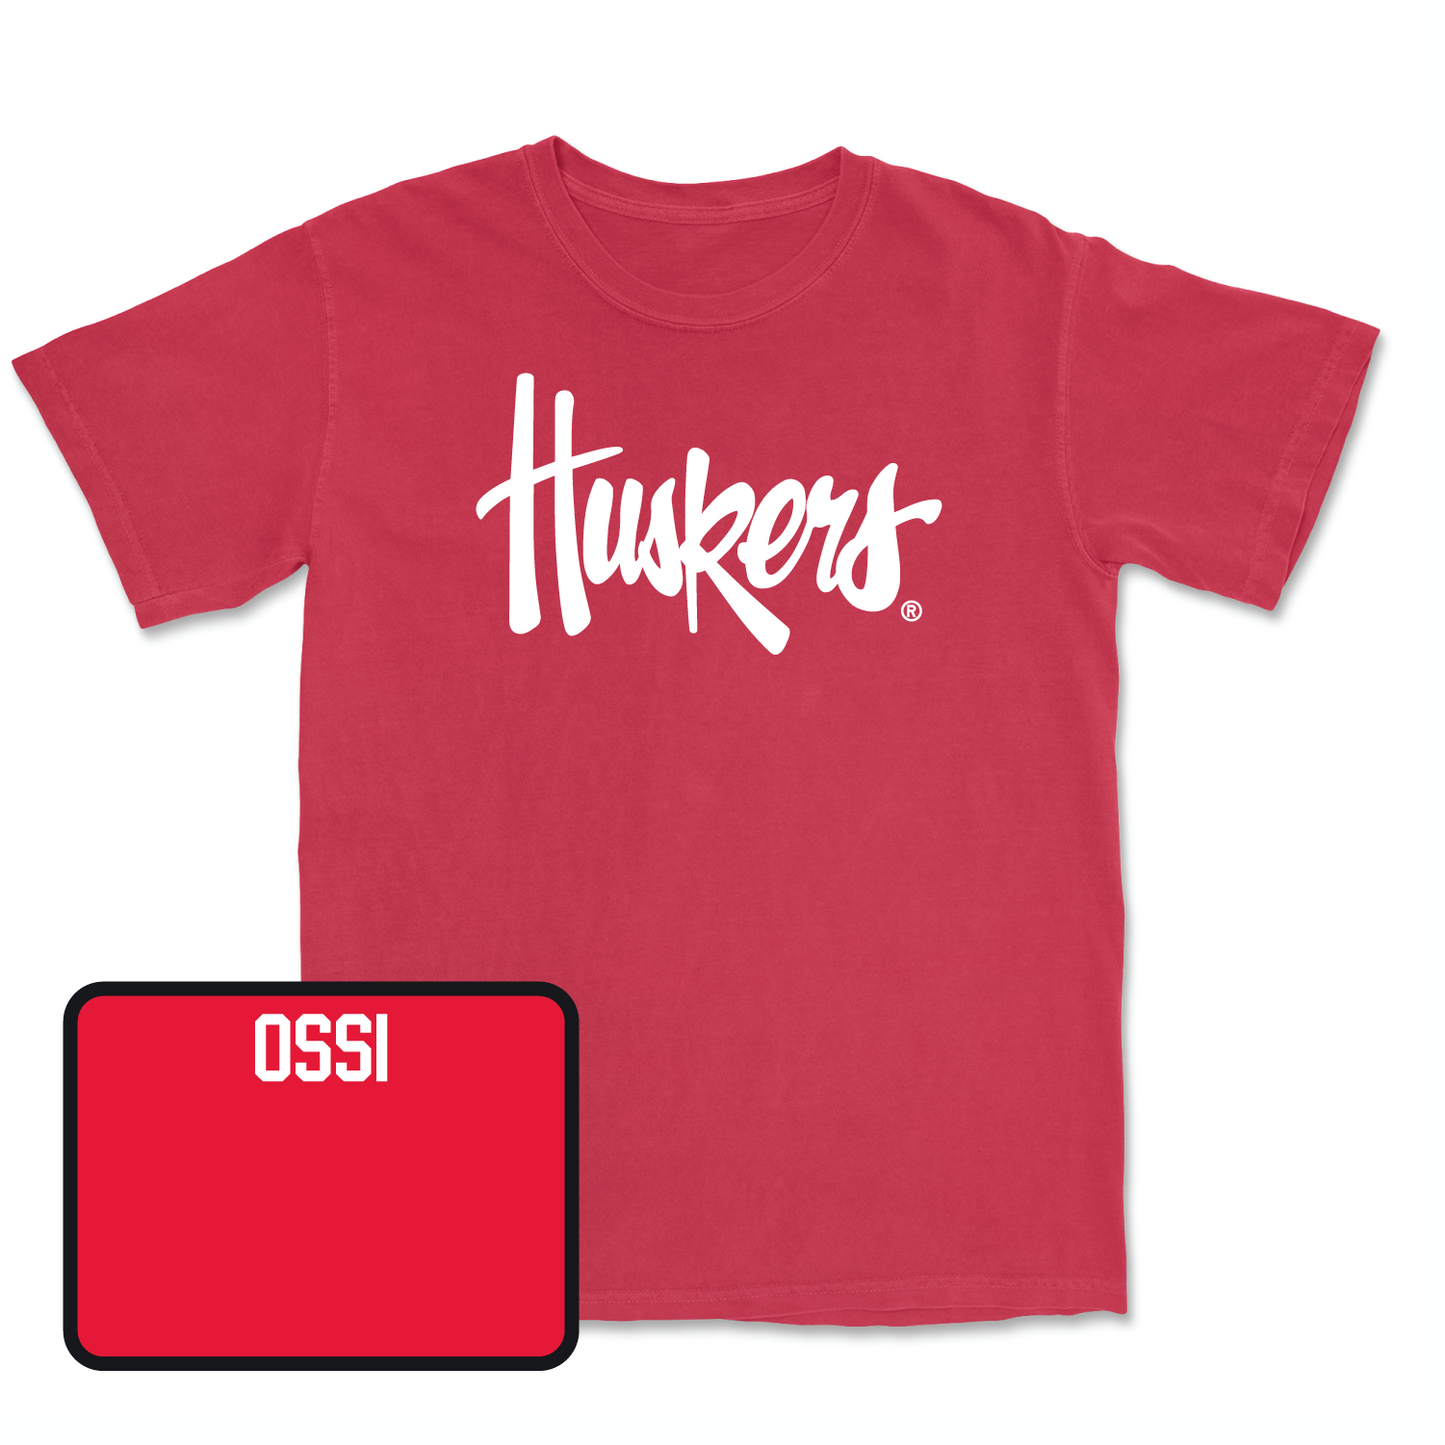 Red Women's Rifle Huskers Tee 2X-Large / Cecelia Ossi